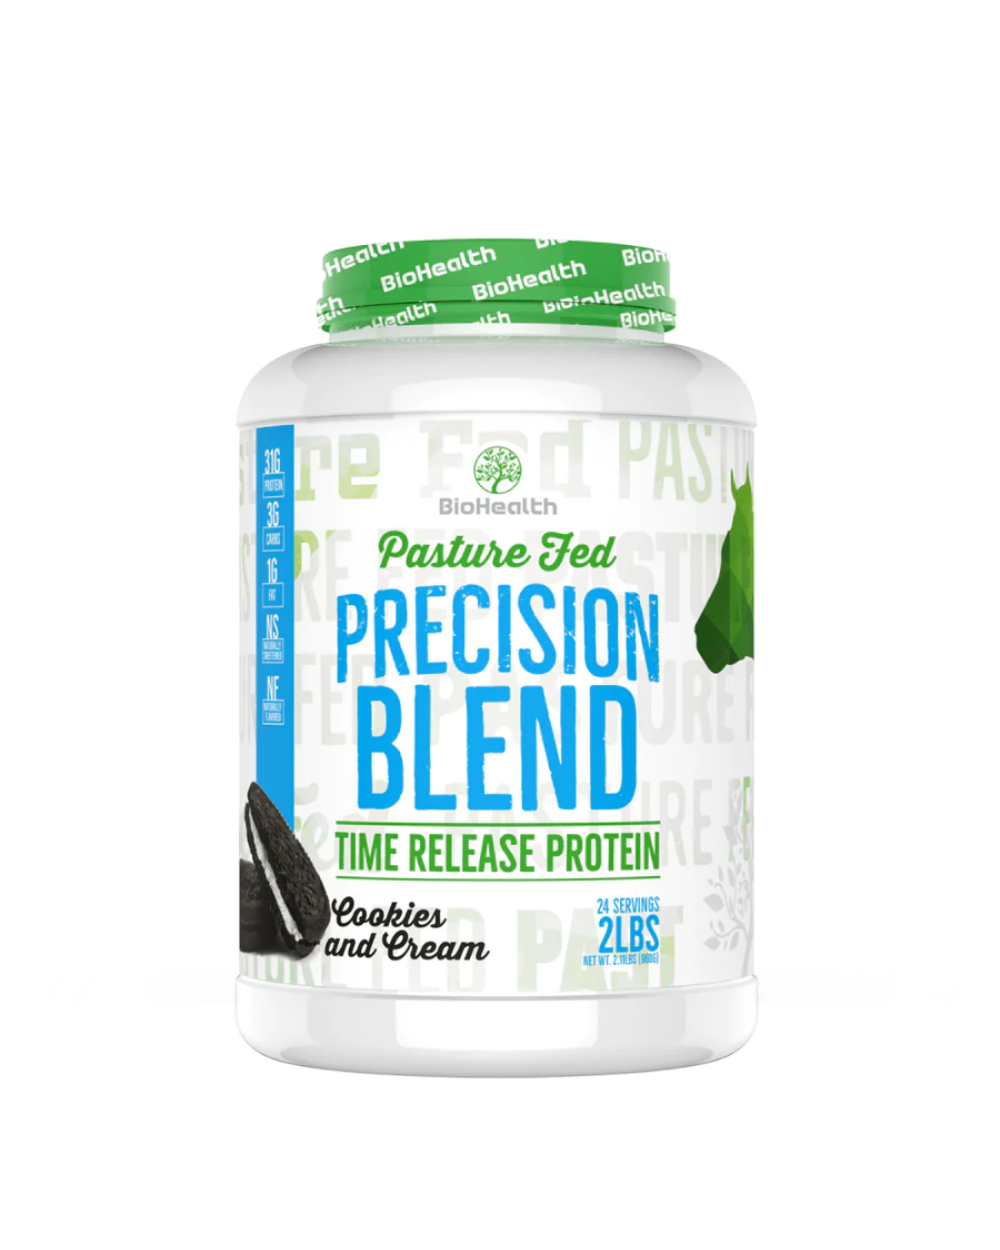 Precision Blend 2lb (Pasture Fed) - Call For In Store Pricing